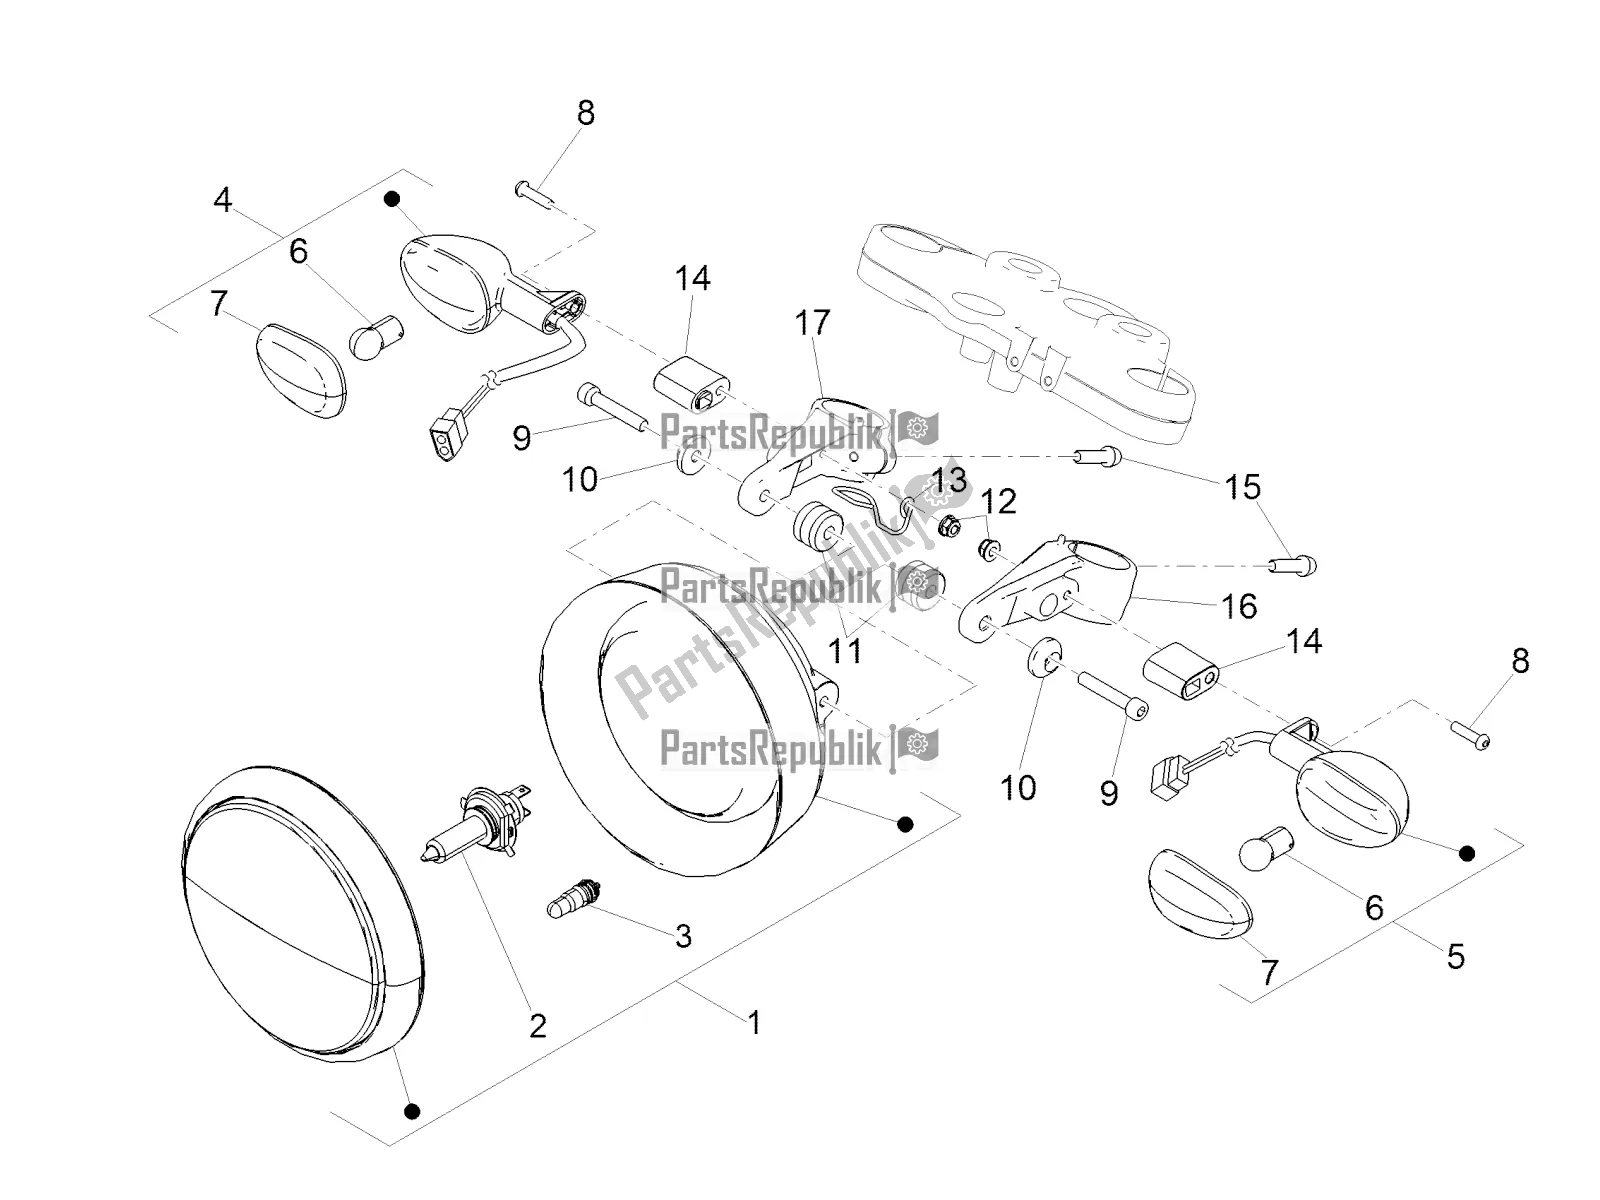 All parts for the Front Lights of the Moto-Guzzi V7 III Stone 750 ABS 2019